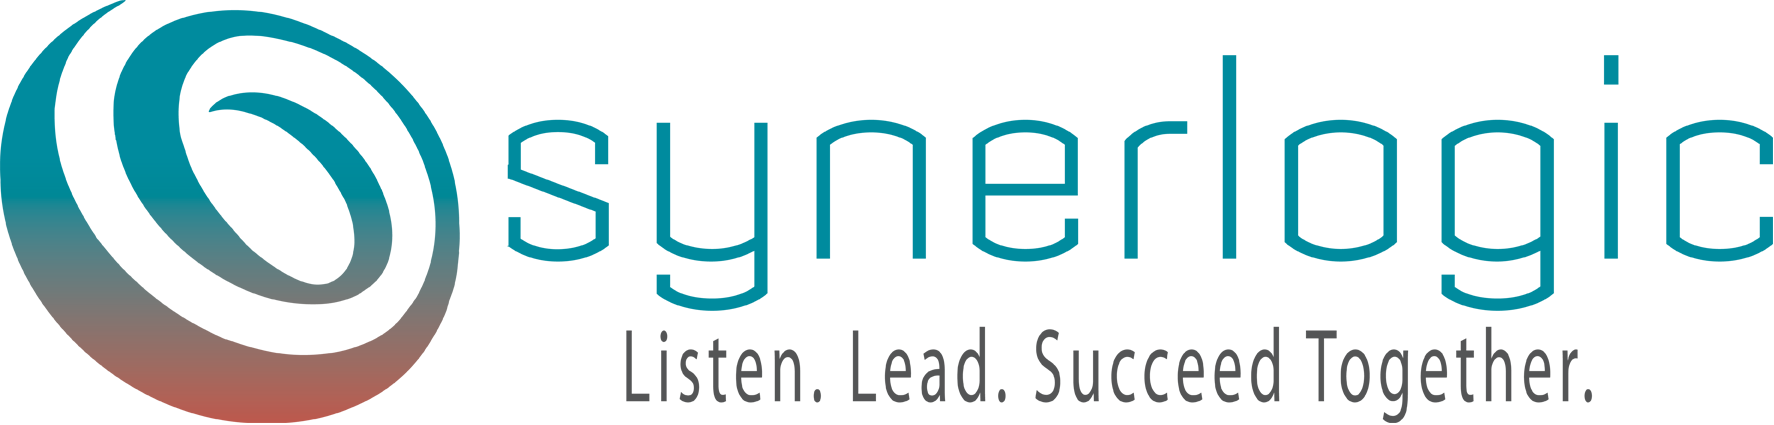 Synerlogic - Home | Synerlogic Consulting GroupSynerlogic Consulting Group | Organization Development Solutions